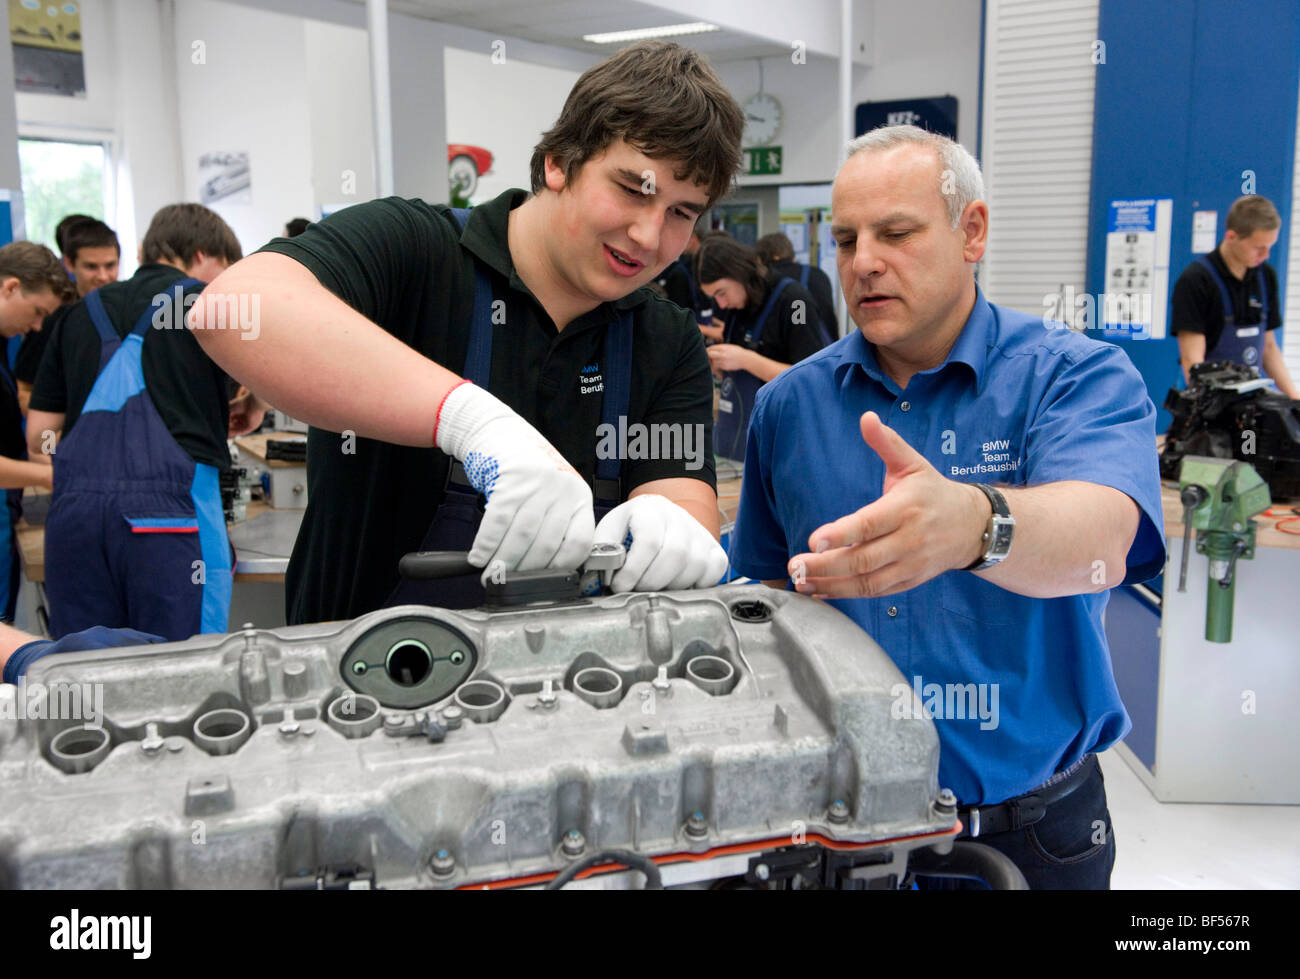 Master explaining to an apprentice while working on an engine in the BMW training center for automotive mechatronics, Munich, B Stock Photo